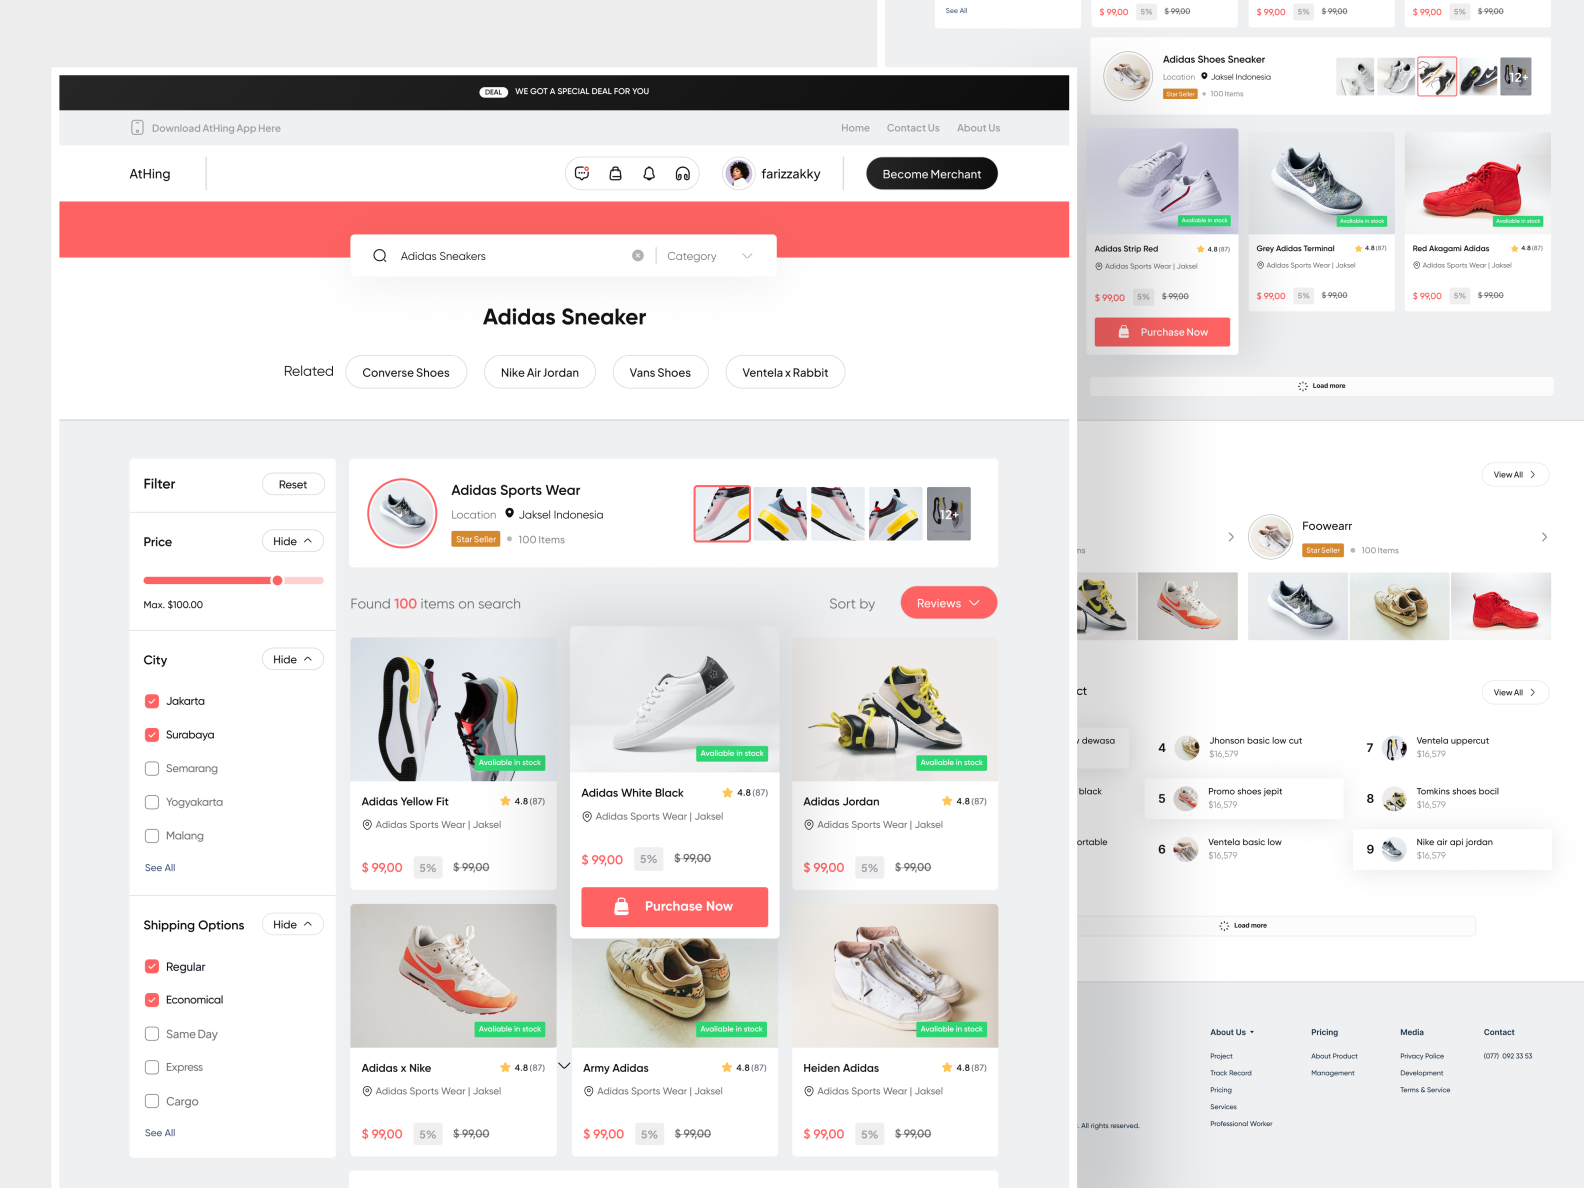 athing-e-commerce-website-by-farizzakky-for-pickolab-studio-on-dribbble